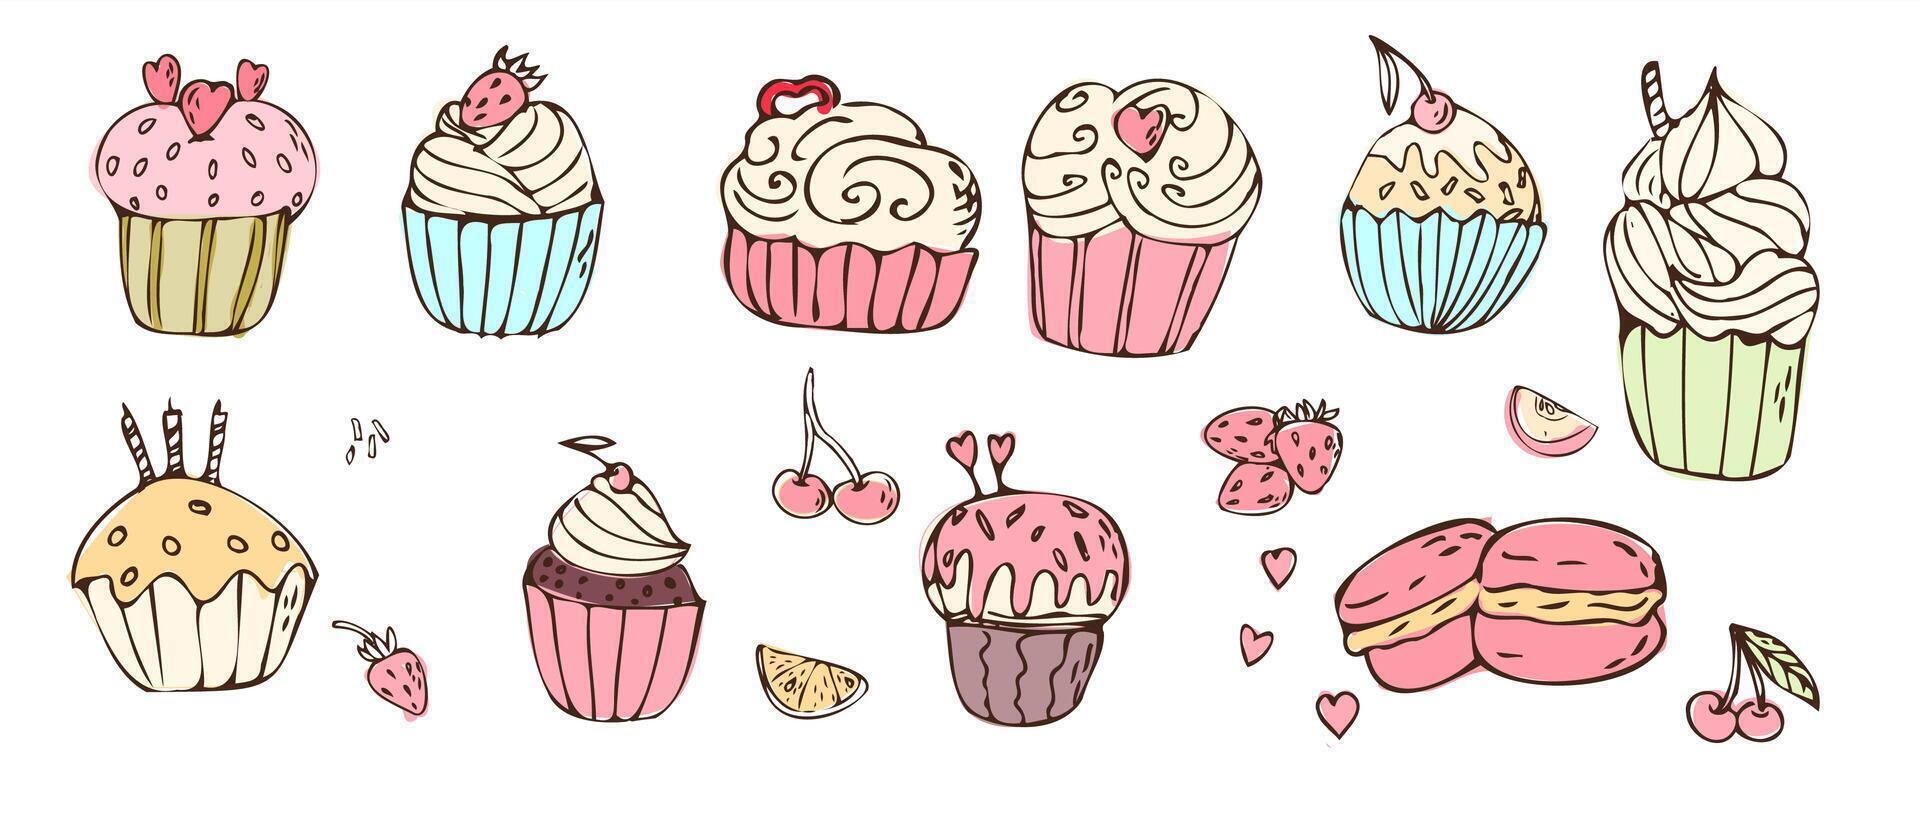 Doodle cupcakes and macaroons with cream, sweet food big set. Vector illustration can used for bakery background, invitation card, poster, textile, banner, greeting card, invitation card, bakery design